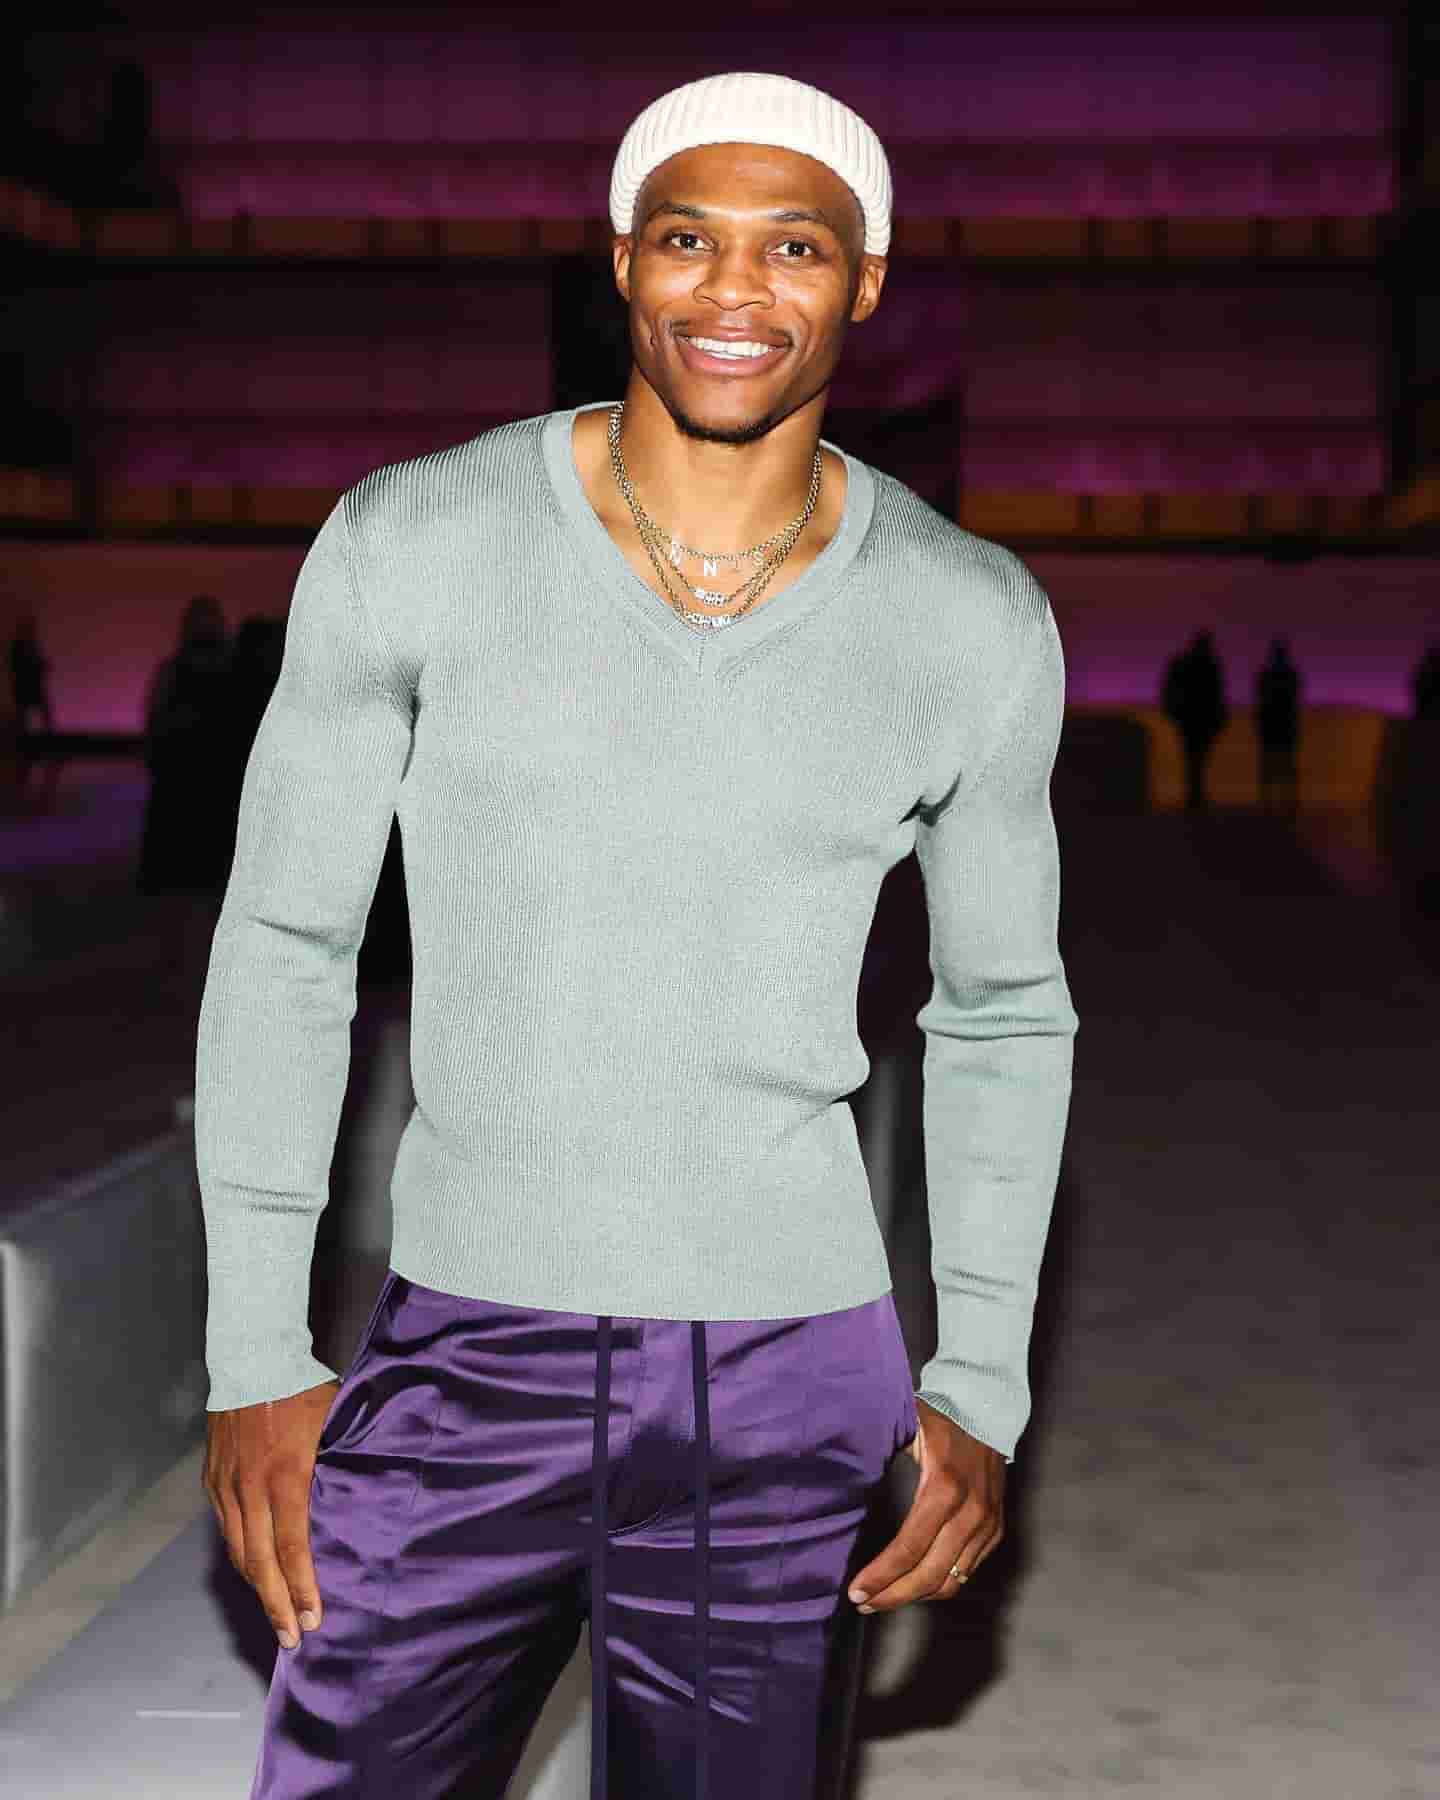 Russell Westbrook early life, Russell Westbrook career, Russell Westbrook social media, Russell Westbrook personal life, Russell Westbrook biography, Russell Westbrook, Russell Westbrook net worth 2022, Russell Westbrook net worth